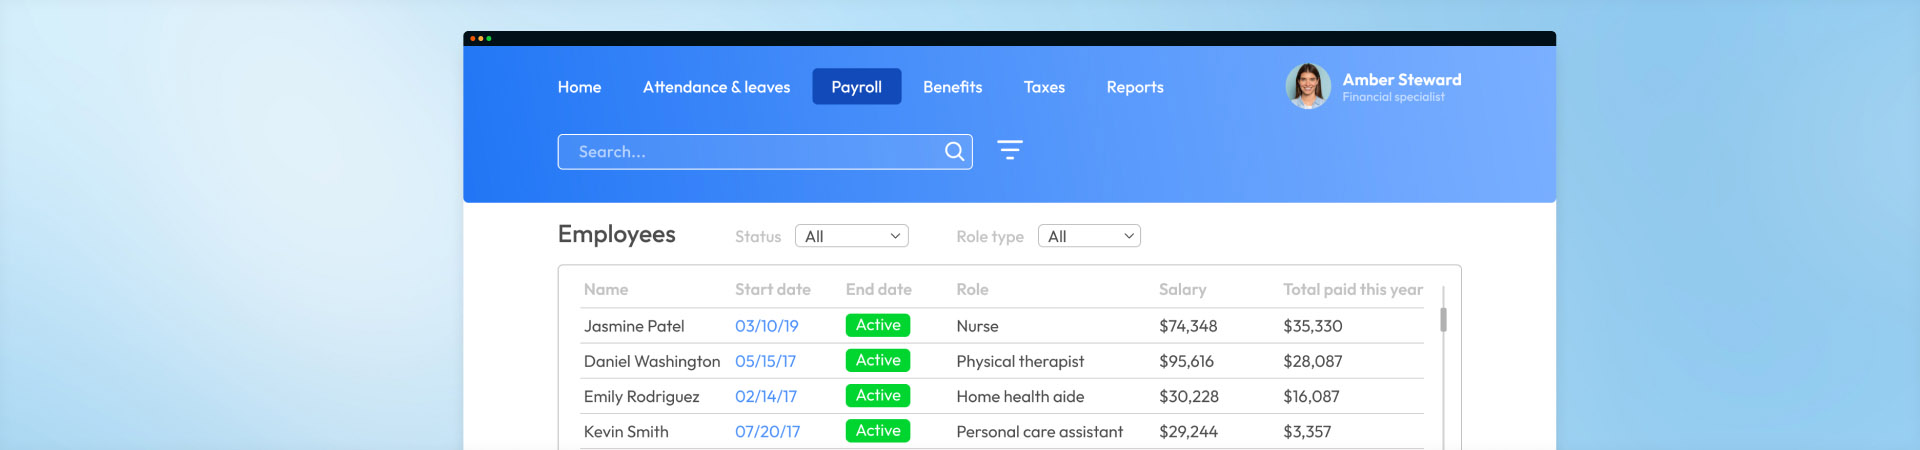 Payroll System Redesign for a Home Healthcare SaaS in 4 Weeks